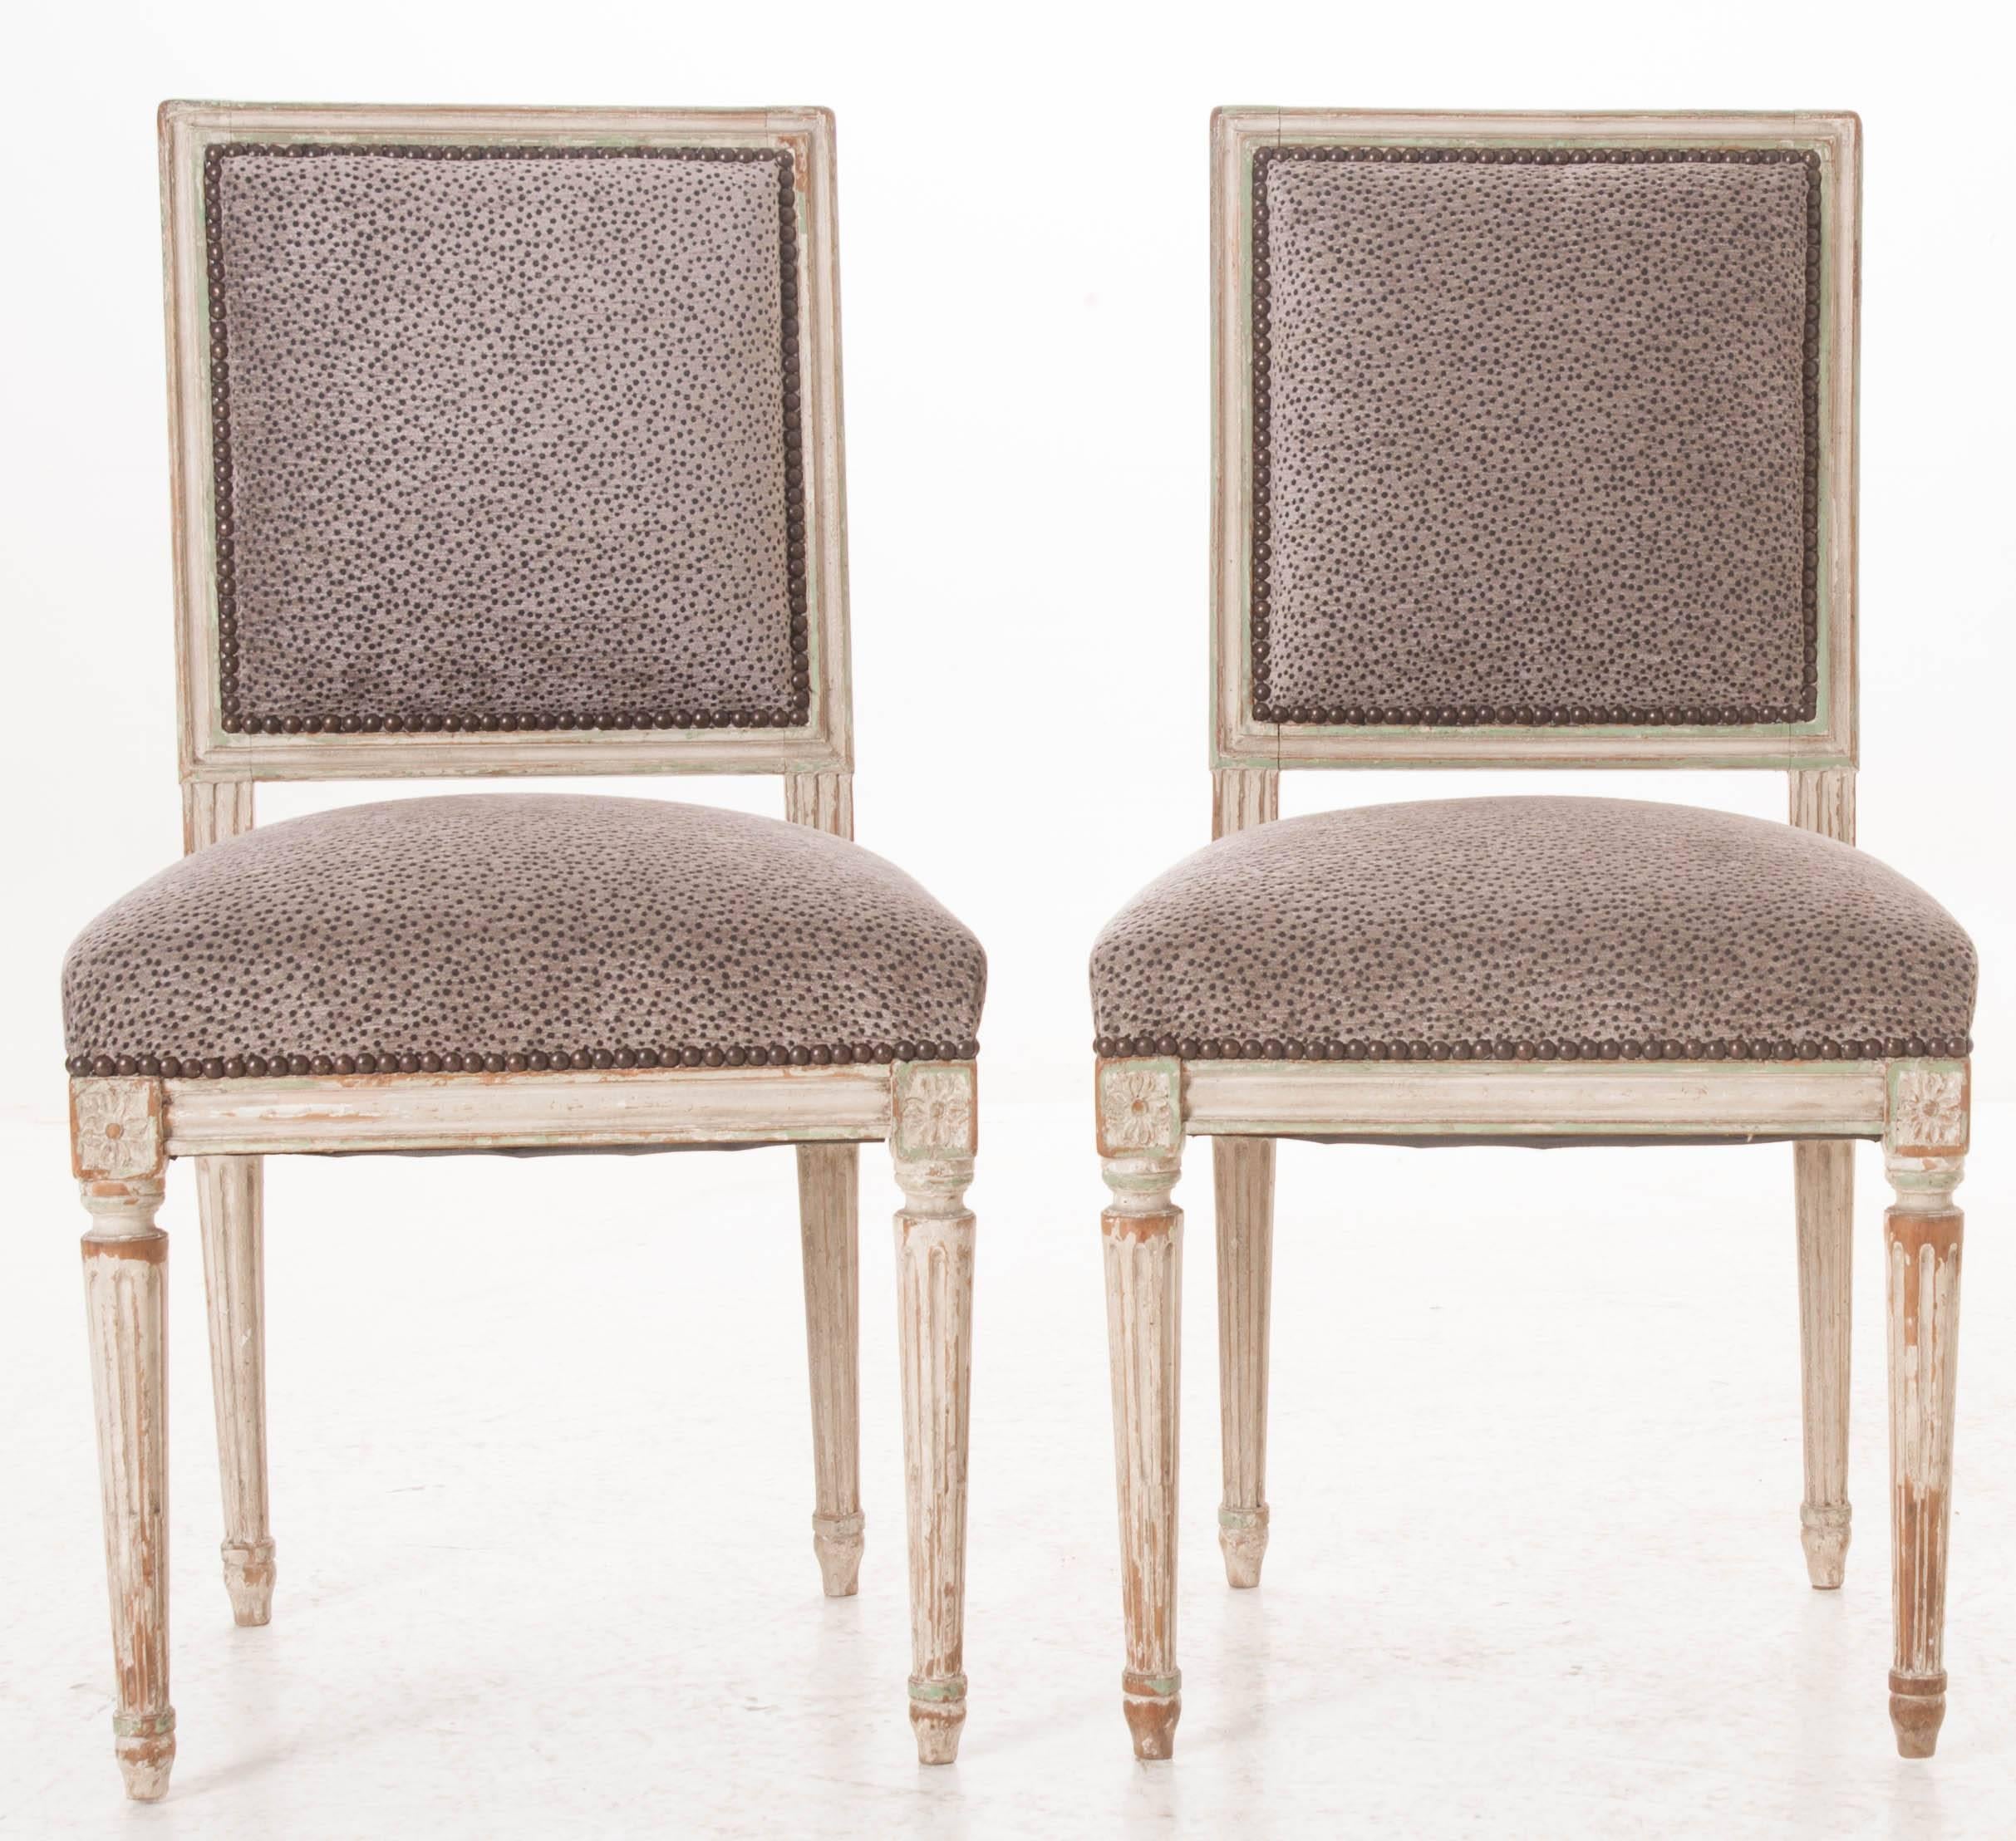 A newly upholstered pair of exceptional painted Louis XVI side chairs from 19th century, France. These lovely square back chairs have great, clean lines and still wear their original paint. Their antique painted finish has acquired extraordinary